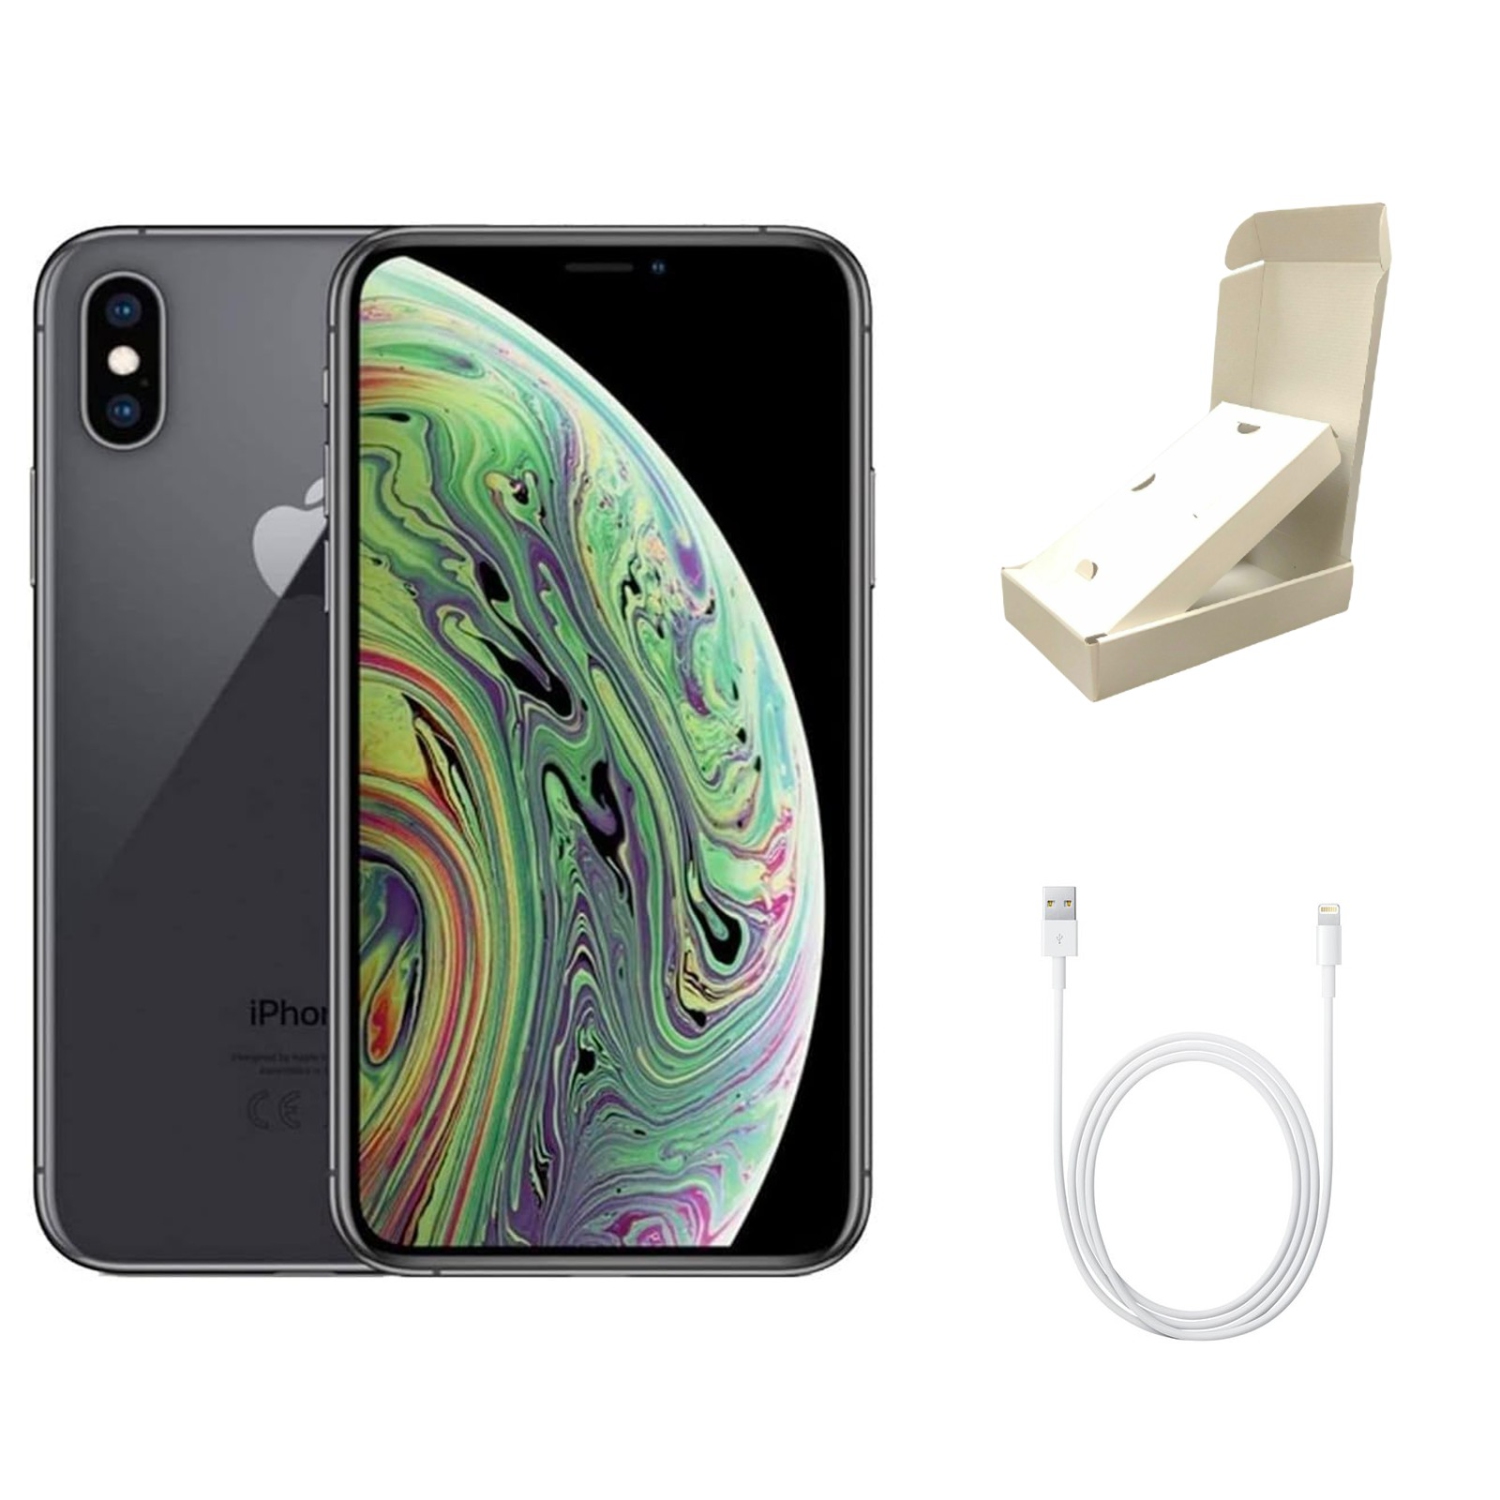 Refurbished (Good) Apple iPhone XS Max A1921 (Fully Unlocked) 64GB Space Gray w/ Gift Box